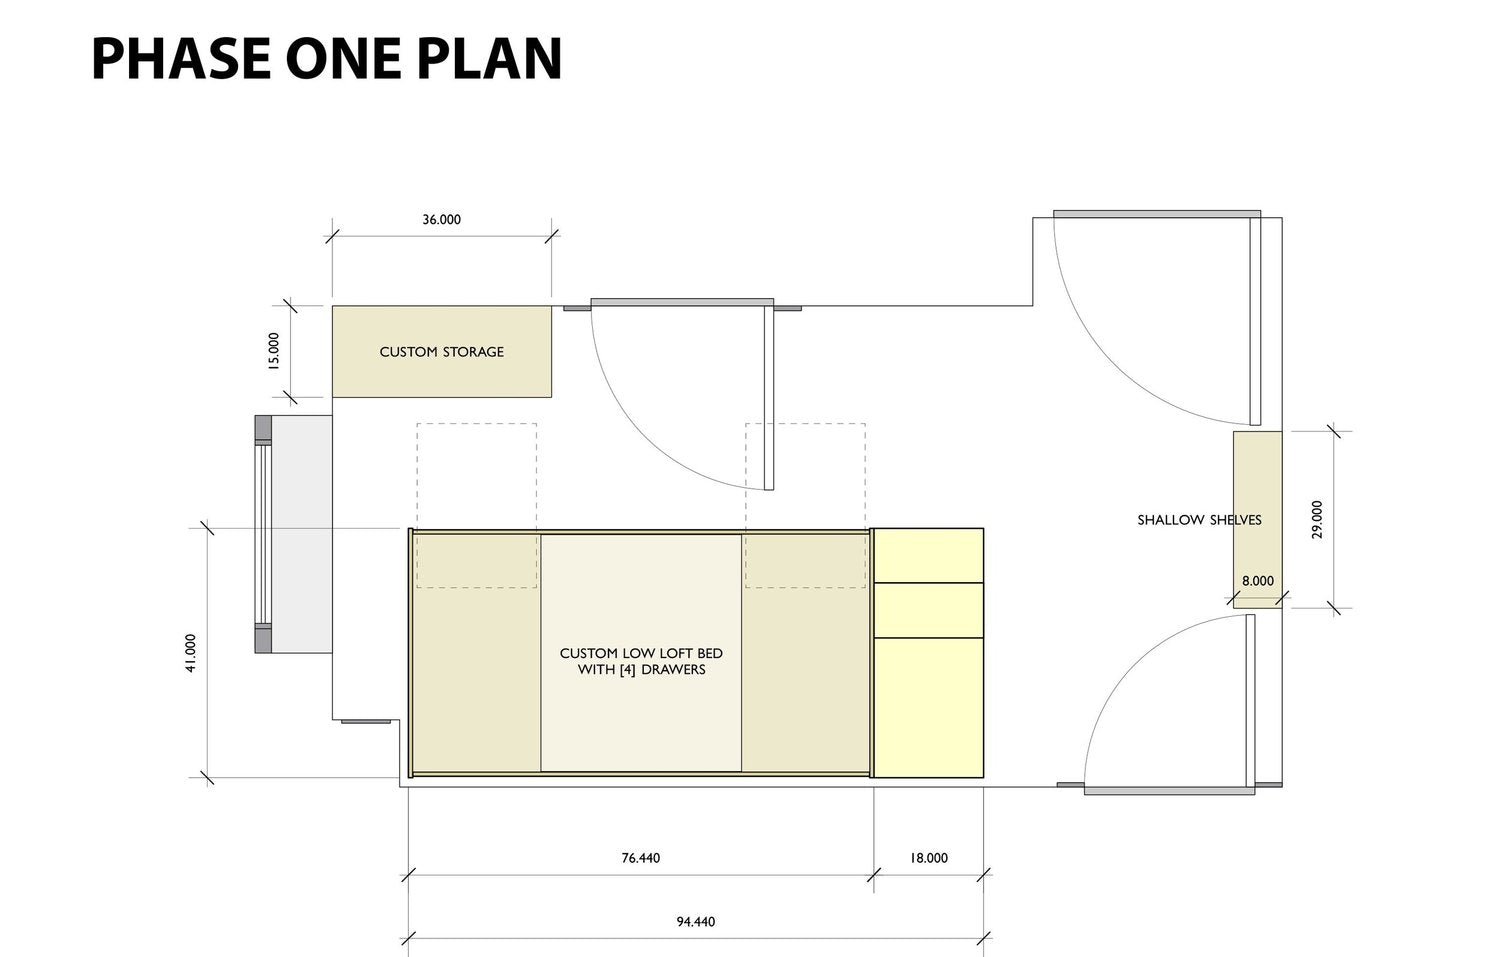 Architectural plan with custom storage, loft bed, and shelves labeled ‘PHASE ONE PLAN’